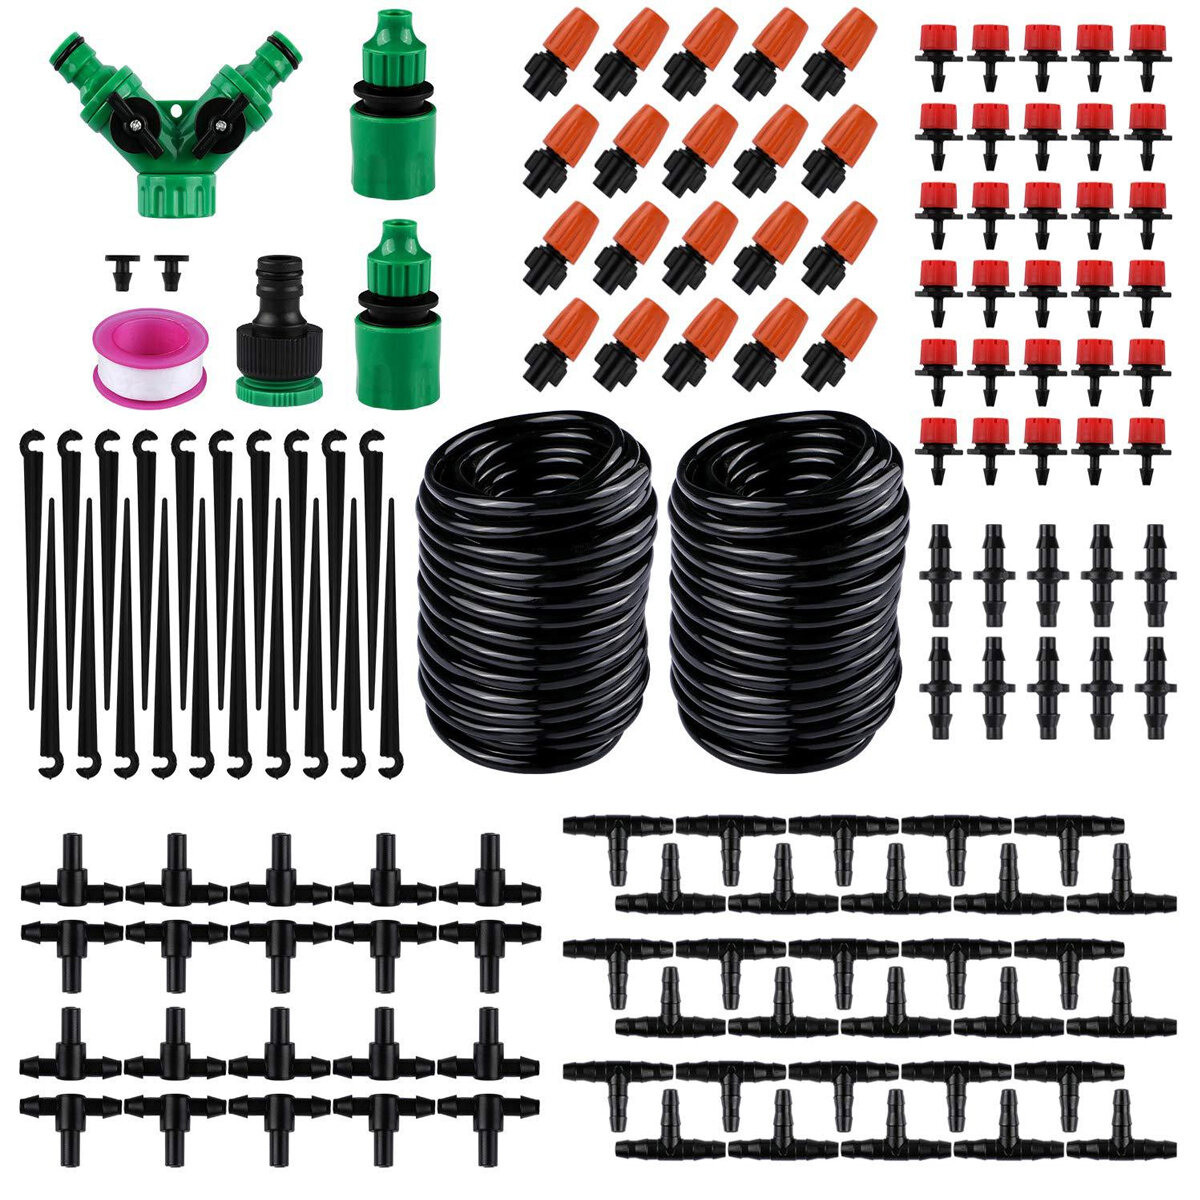 30M 100FT Micro Drip Irrigation System Auto Watering Plant Timer Garden Hose Kit